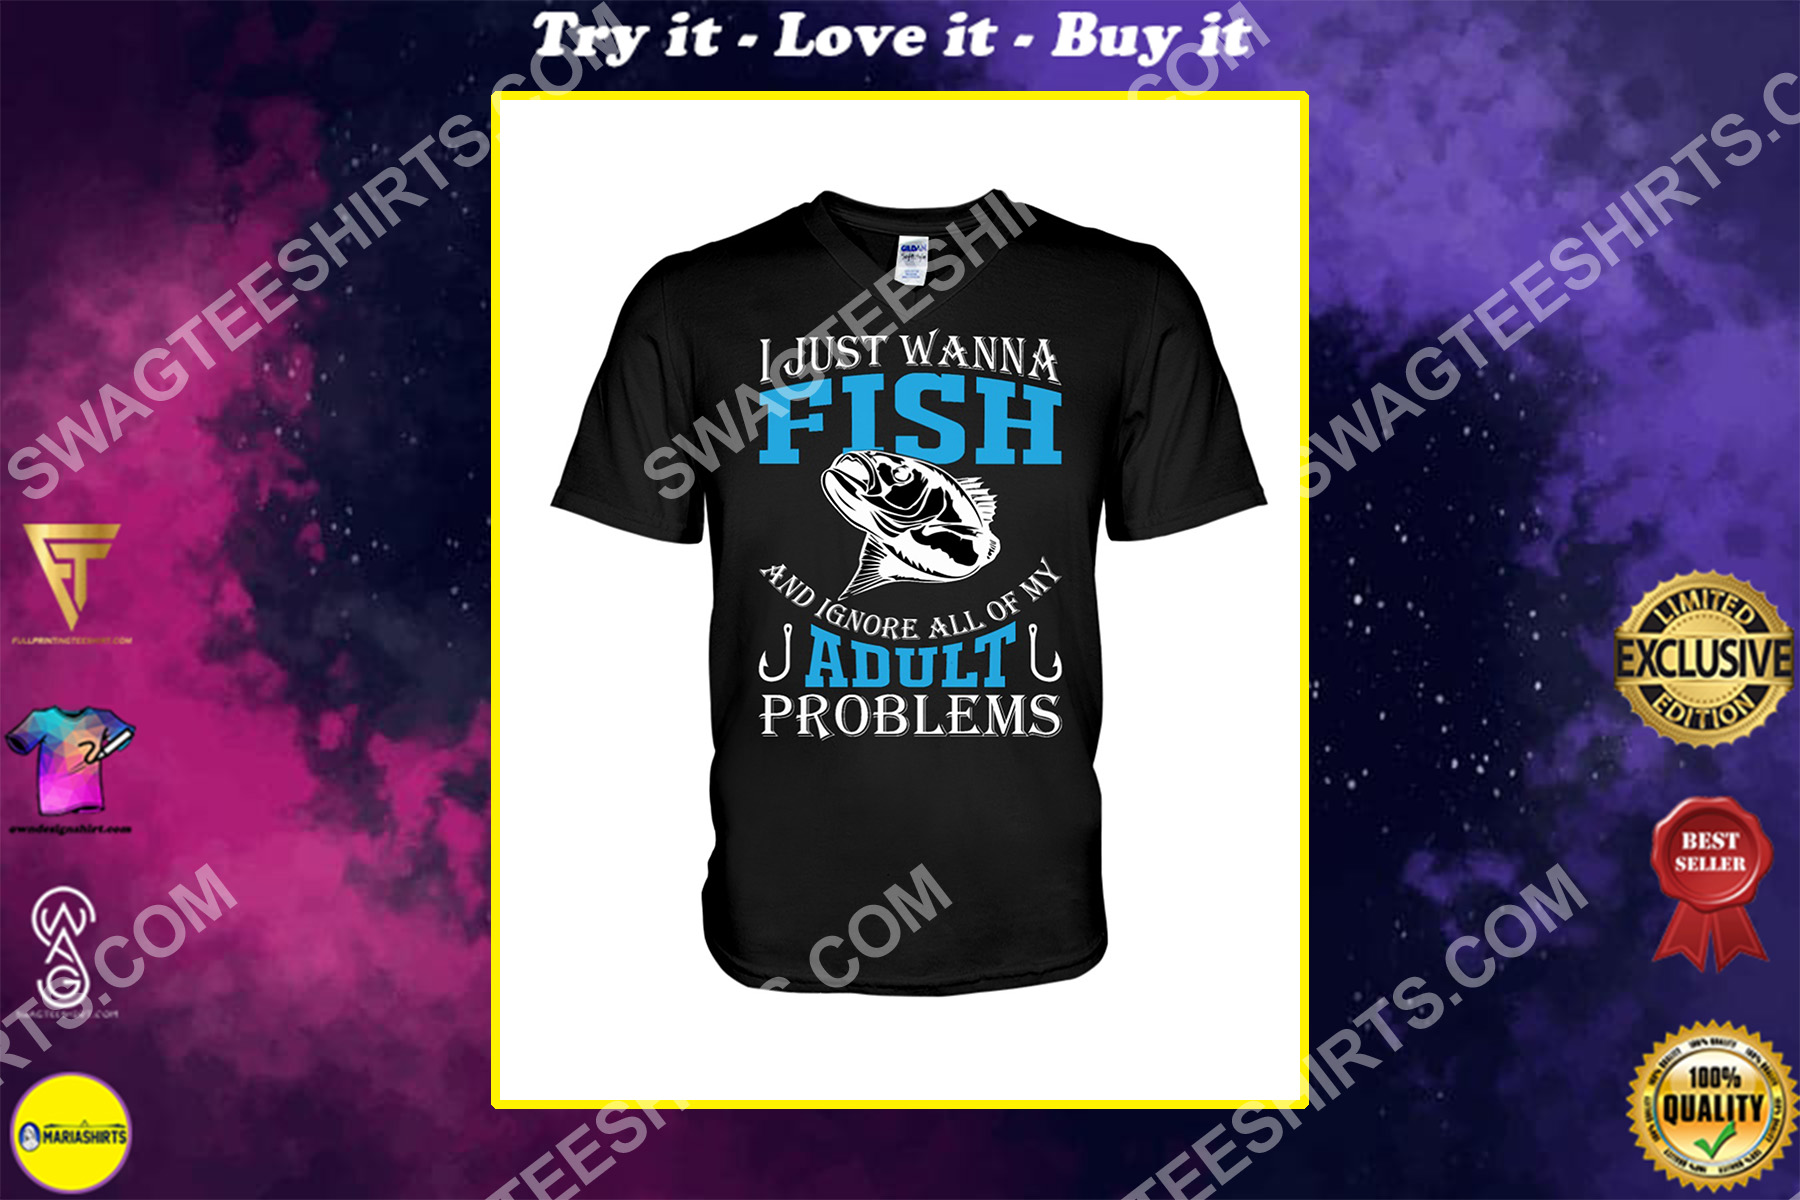 I Just Wanna Fish and Ignore all of My Adult Problems Shirt